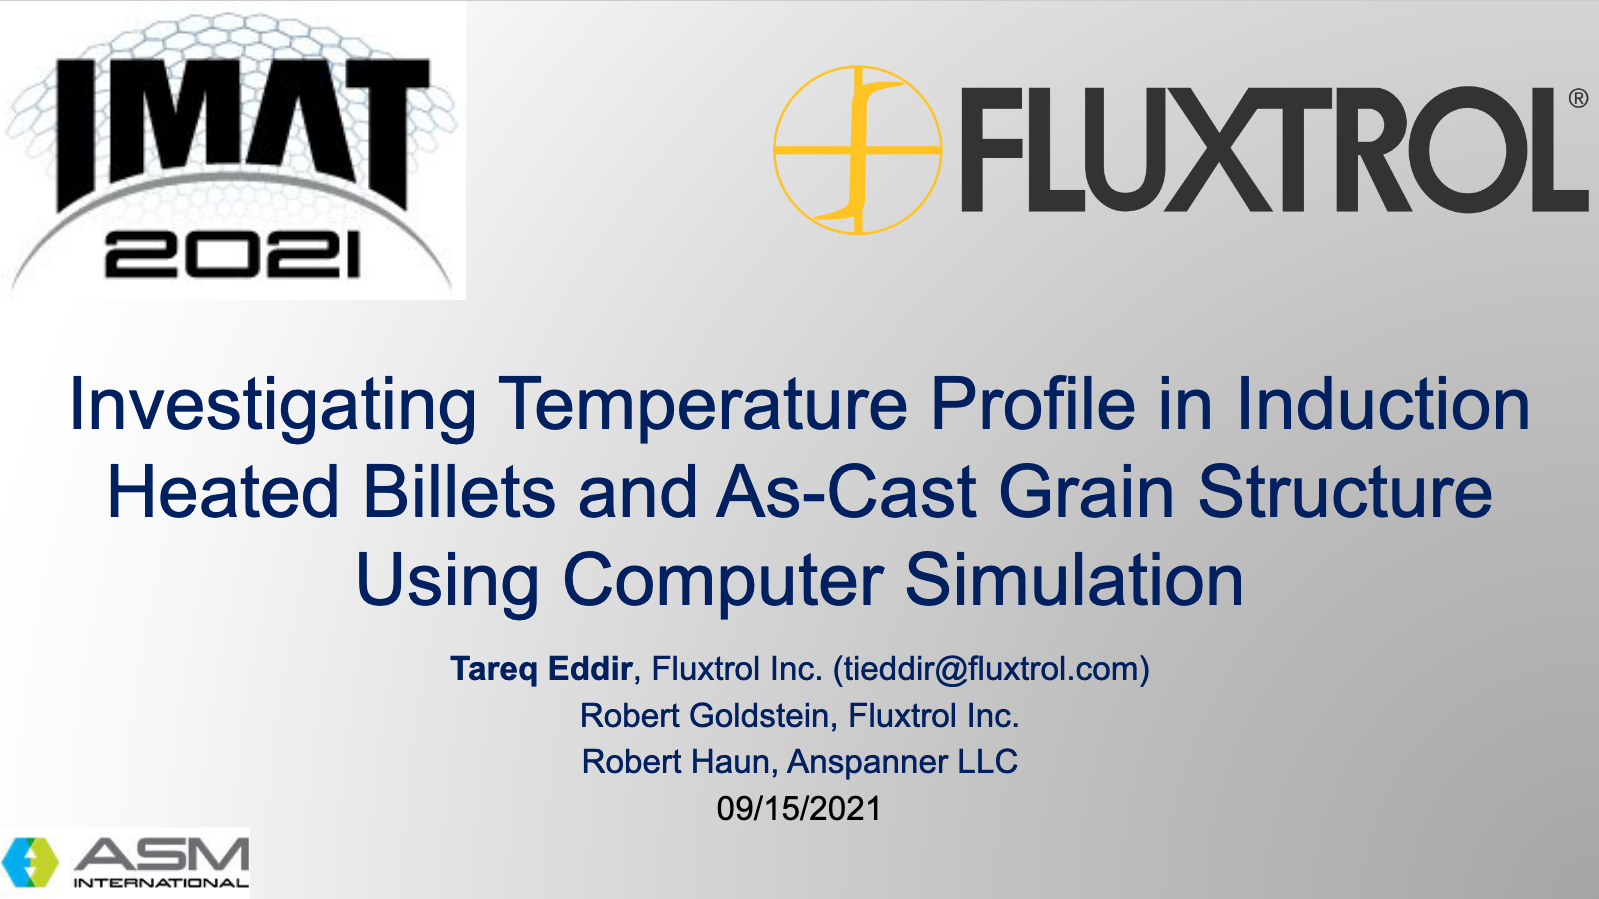 Fluxtrol IMAT 2021 Investigating Temperature Profile in Induction Heated Billets and As-Cast Grain Structure Using Computer Simulation Presentation